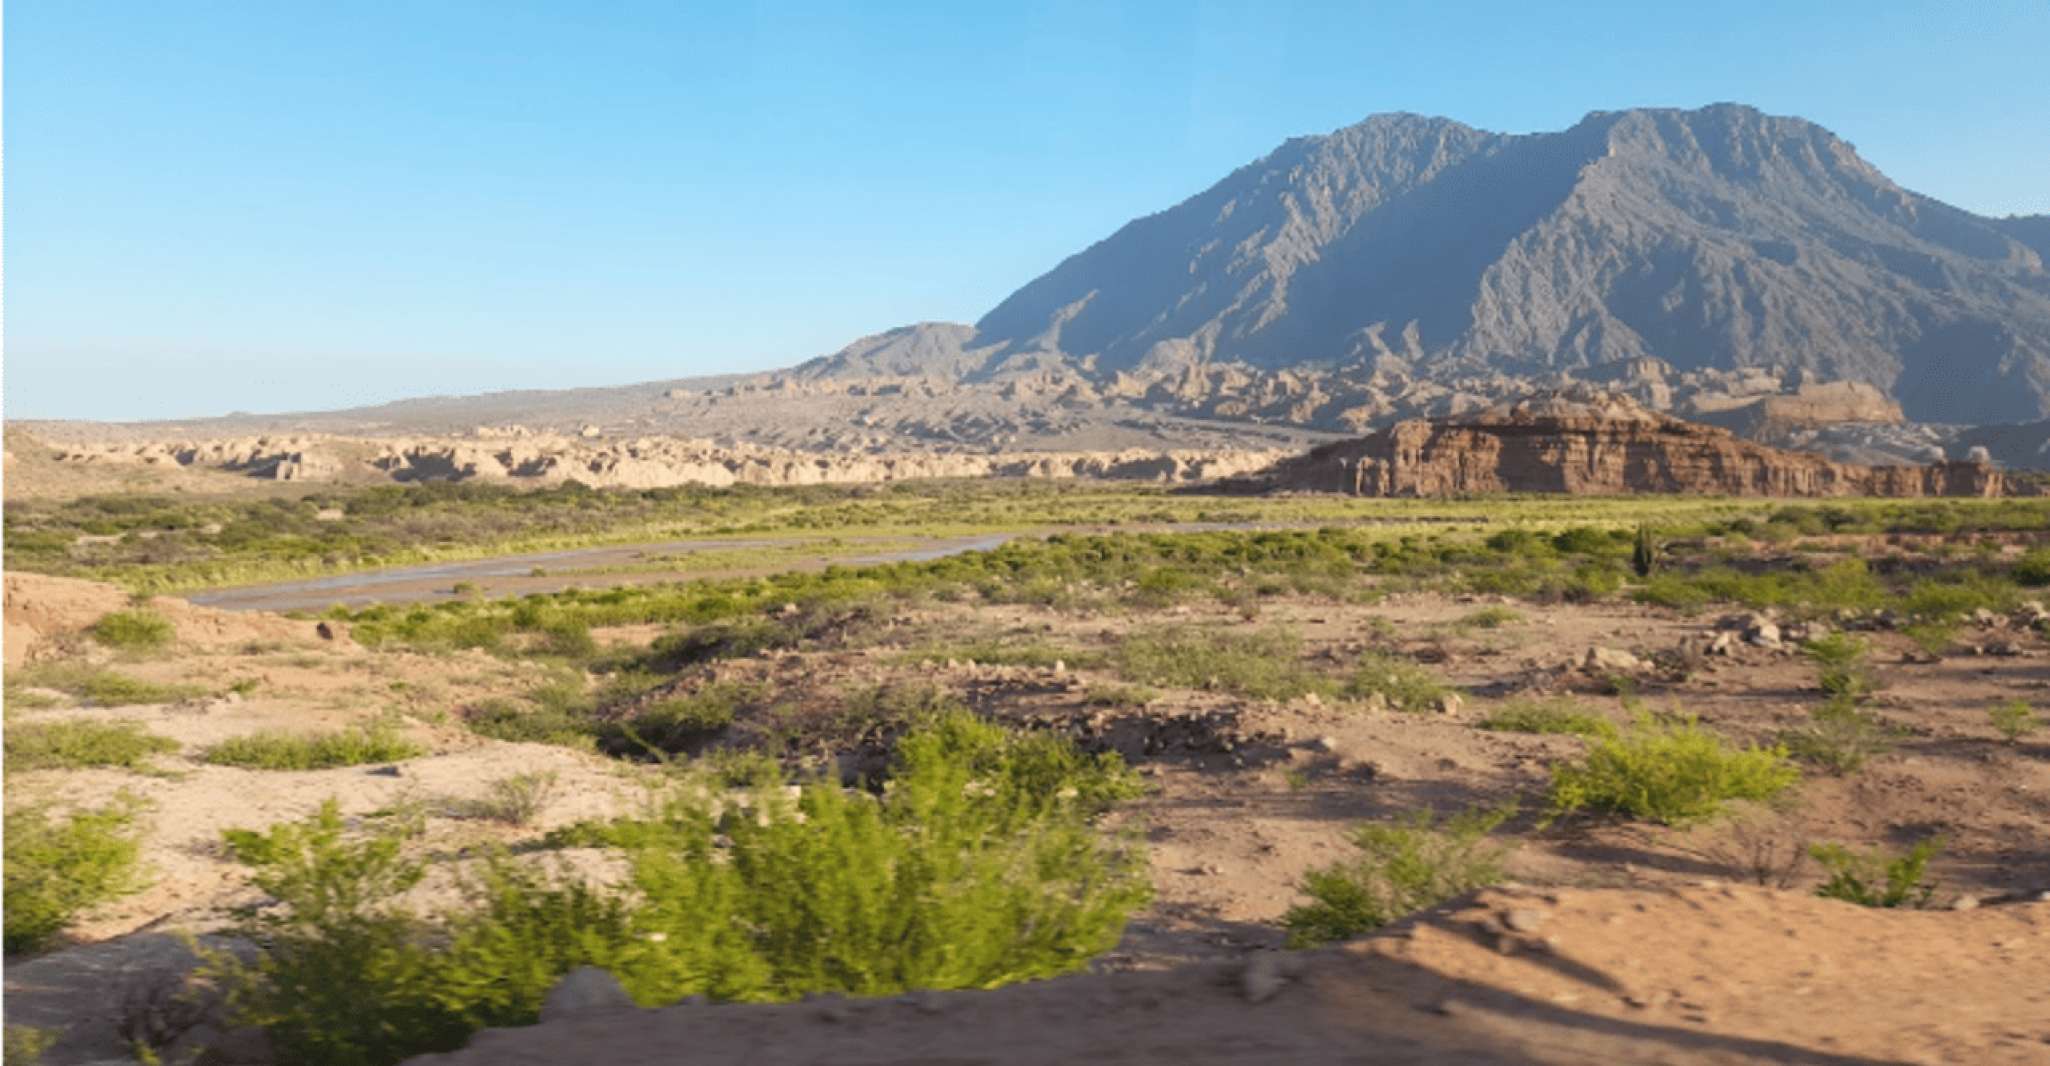 From Salta, Cafayate, land of wines and imposing ravines - Housity